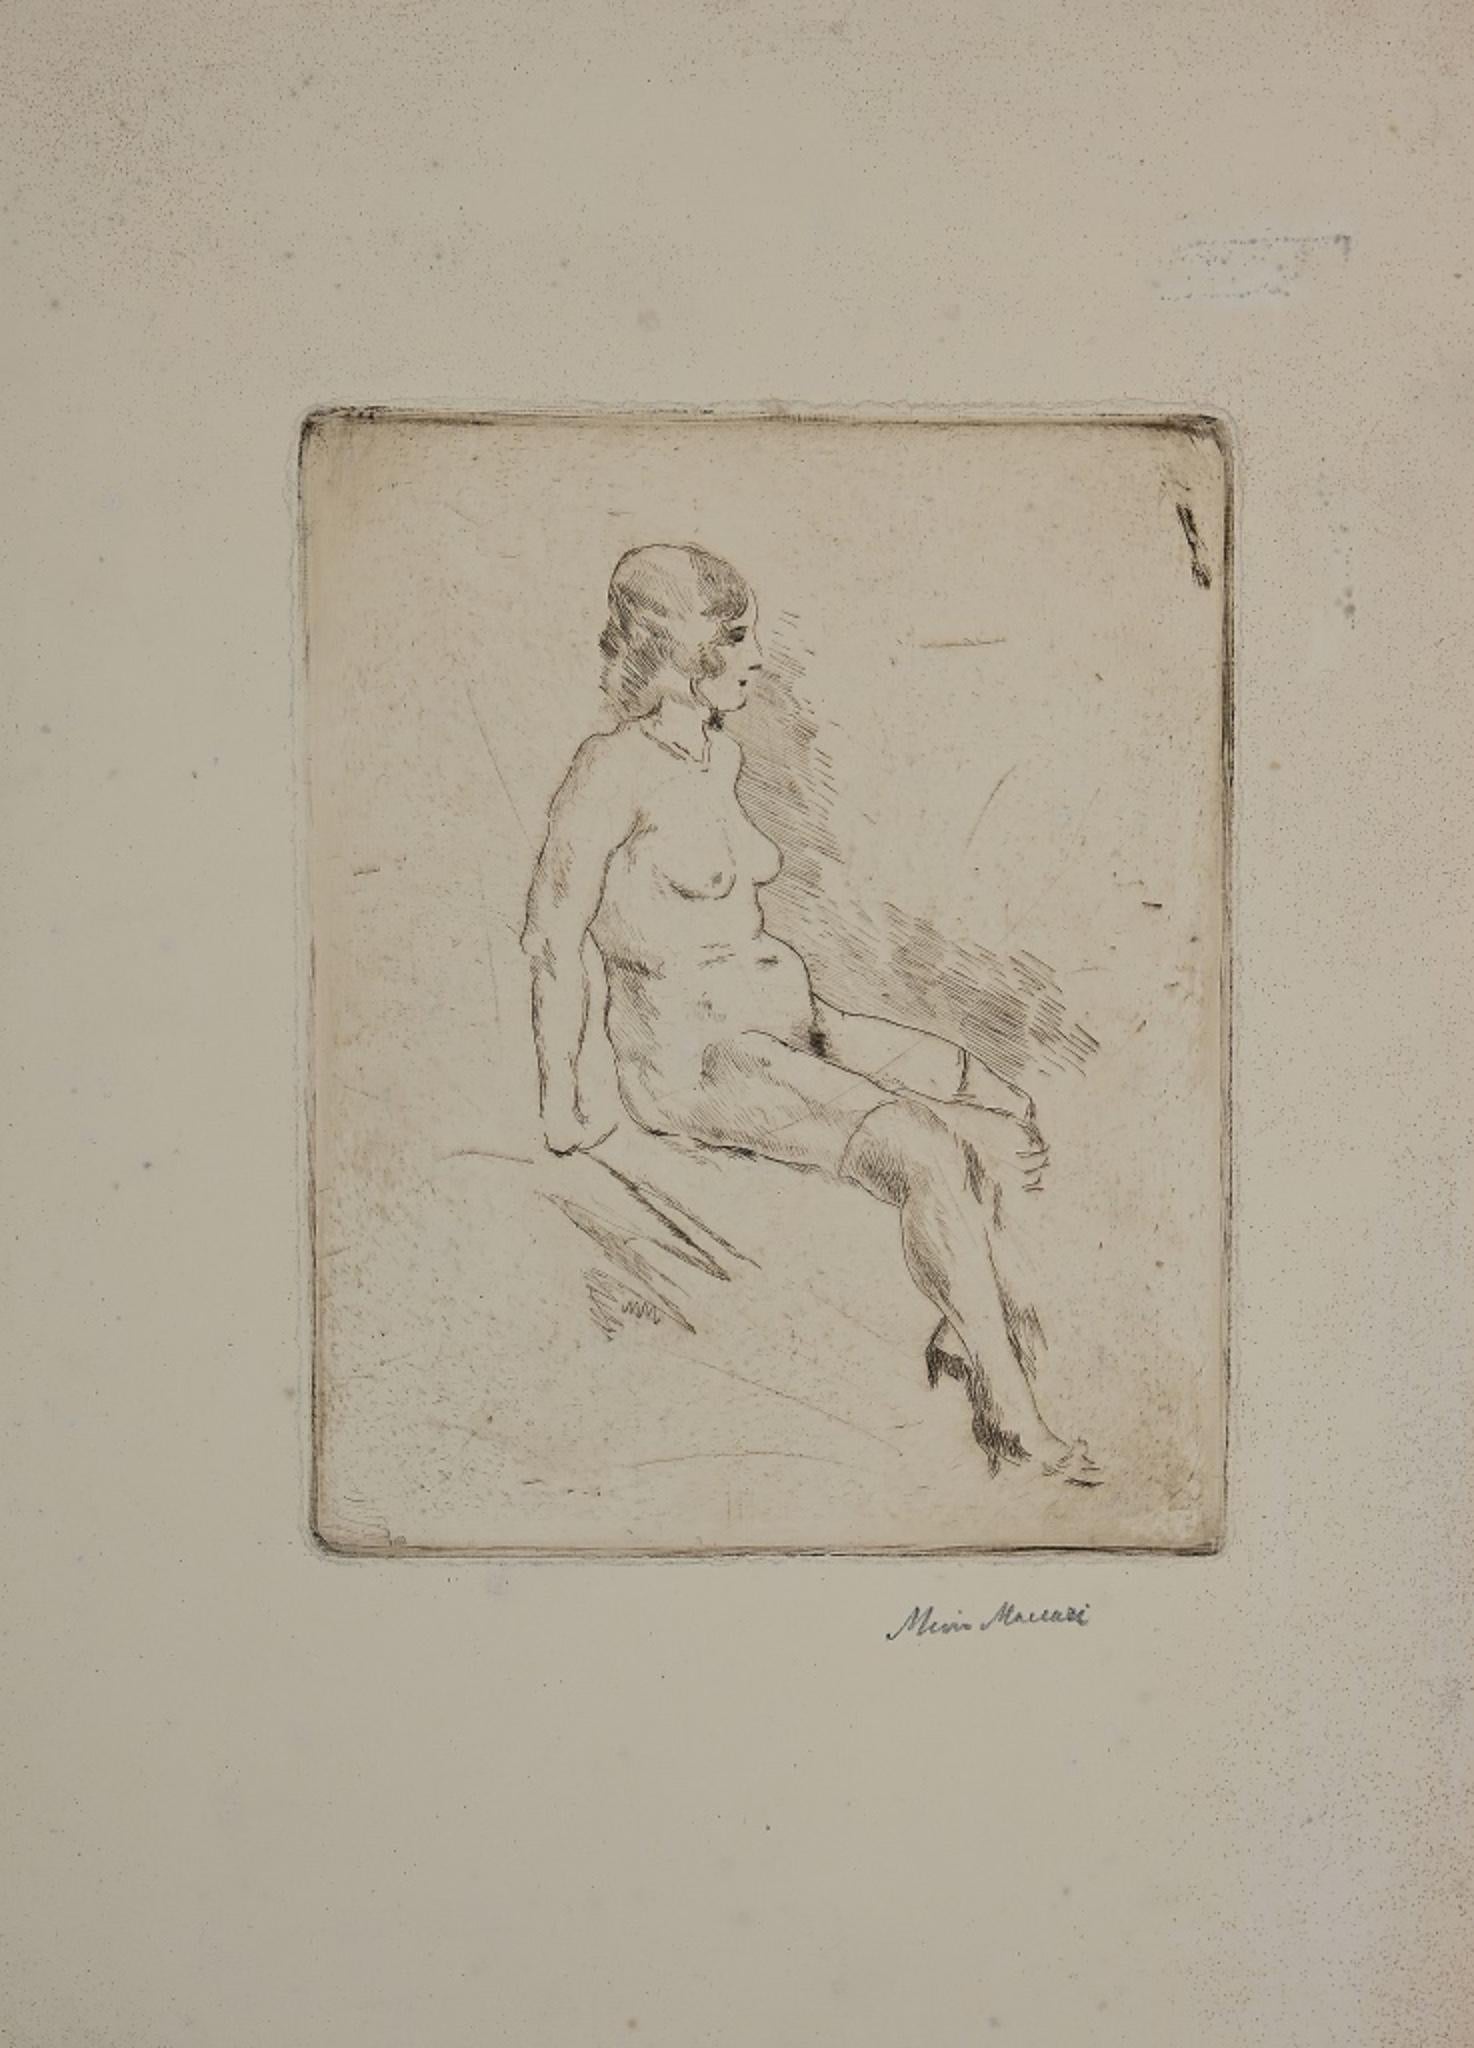 Nude of Woman 1929 is an original drypoint realized by Mino Maccari (1929).

The artwork is in good conditions, some worn paper on the margins, hand-signed by the artist on the lower right corner.  Image Dimensions: 22X17.5 cm.

Mino Maccari was an